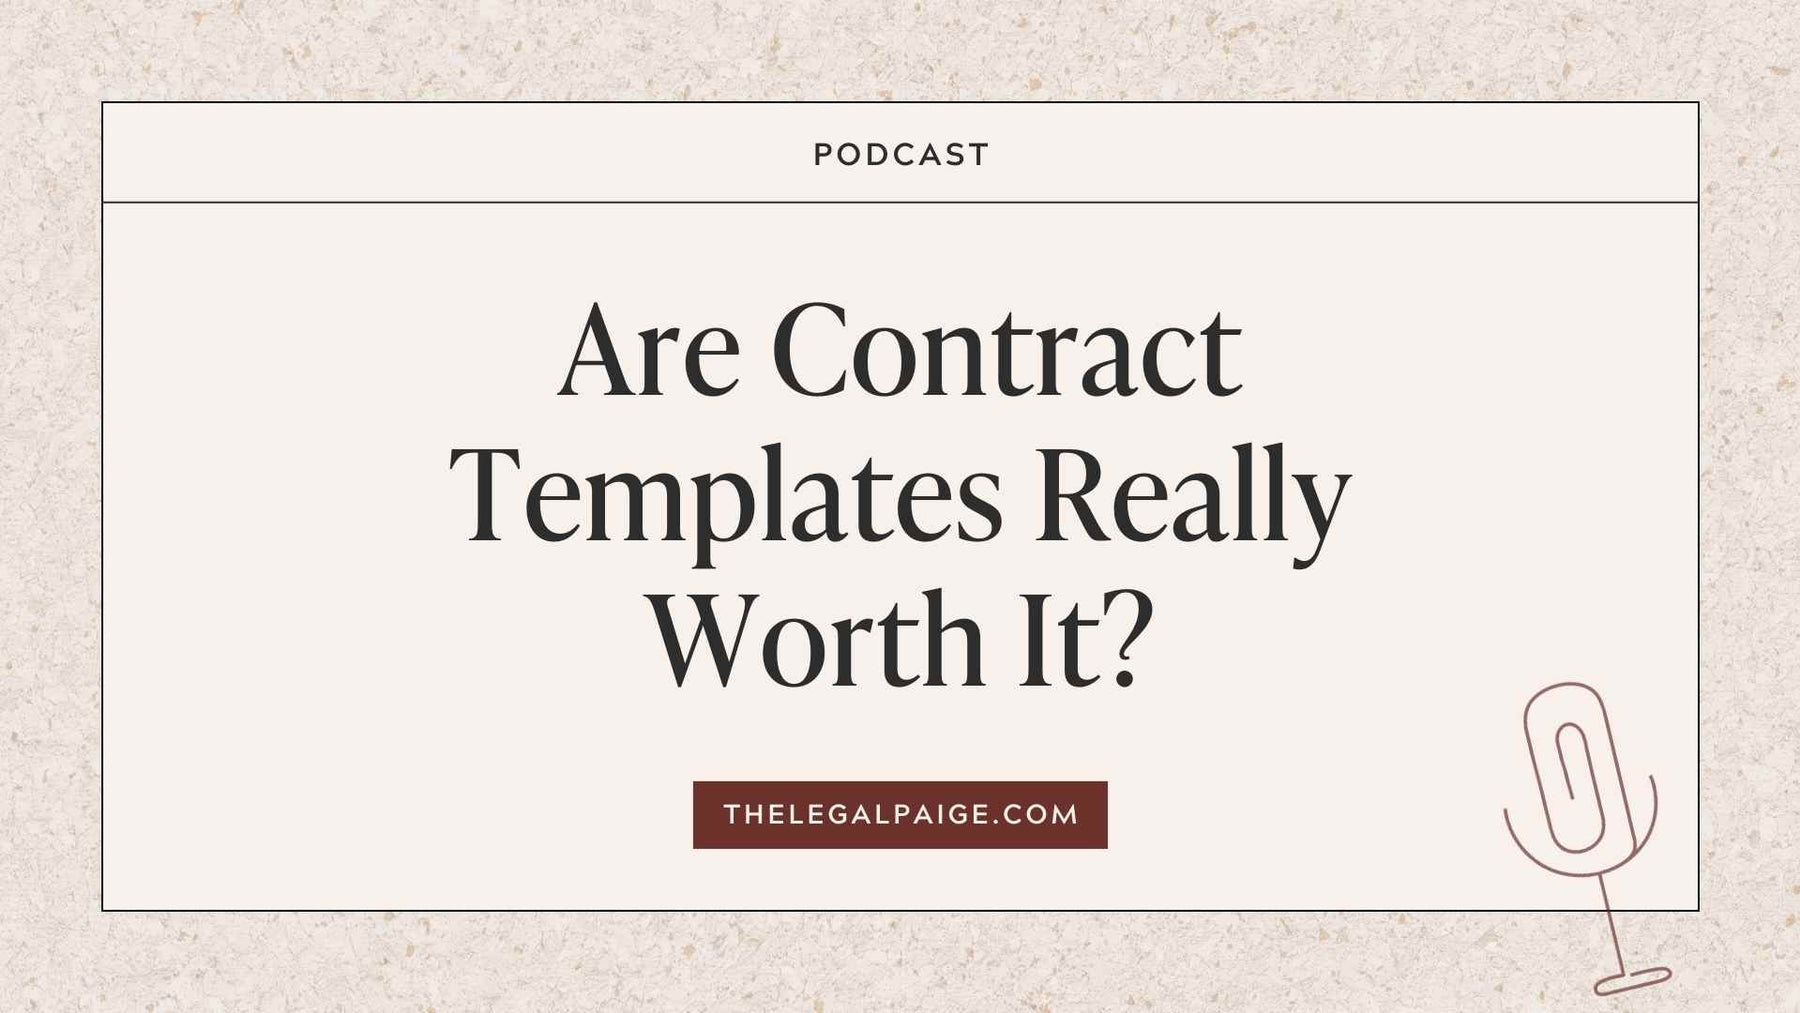 Episode 87: Are Contract Templates Really Worth It?